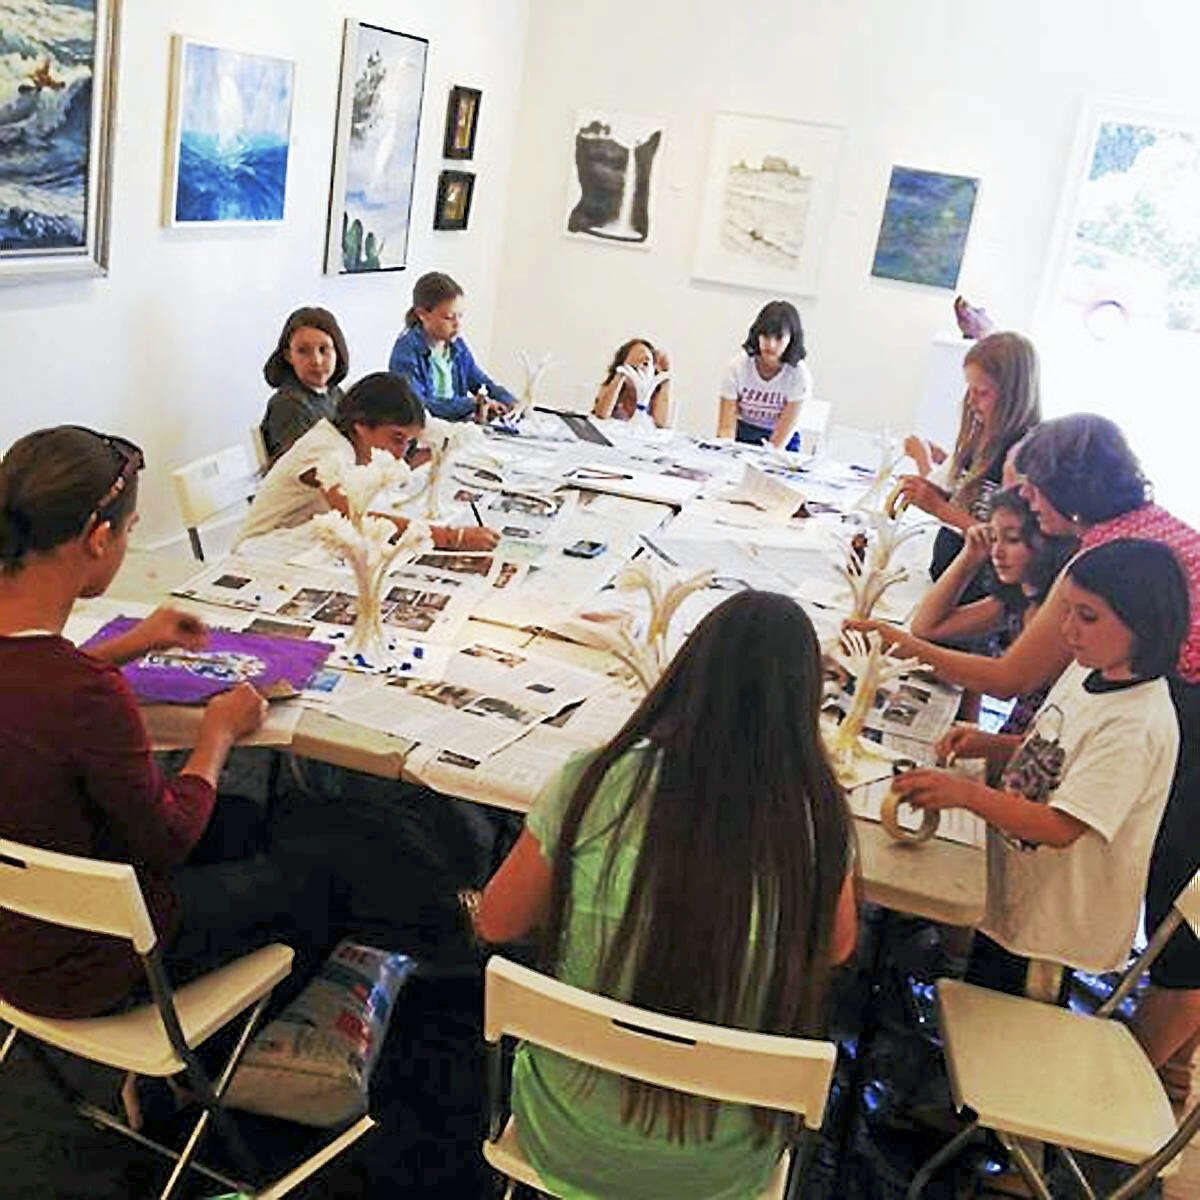 Contributed photoEnrollment is now open for a variety of children's art classes at Spectrum Gallery.